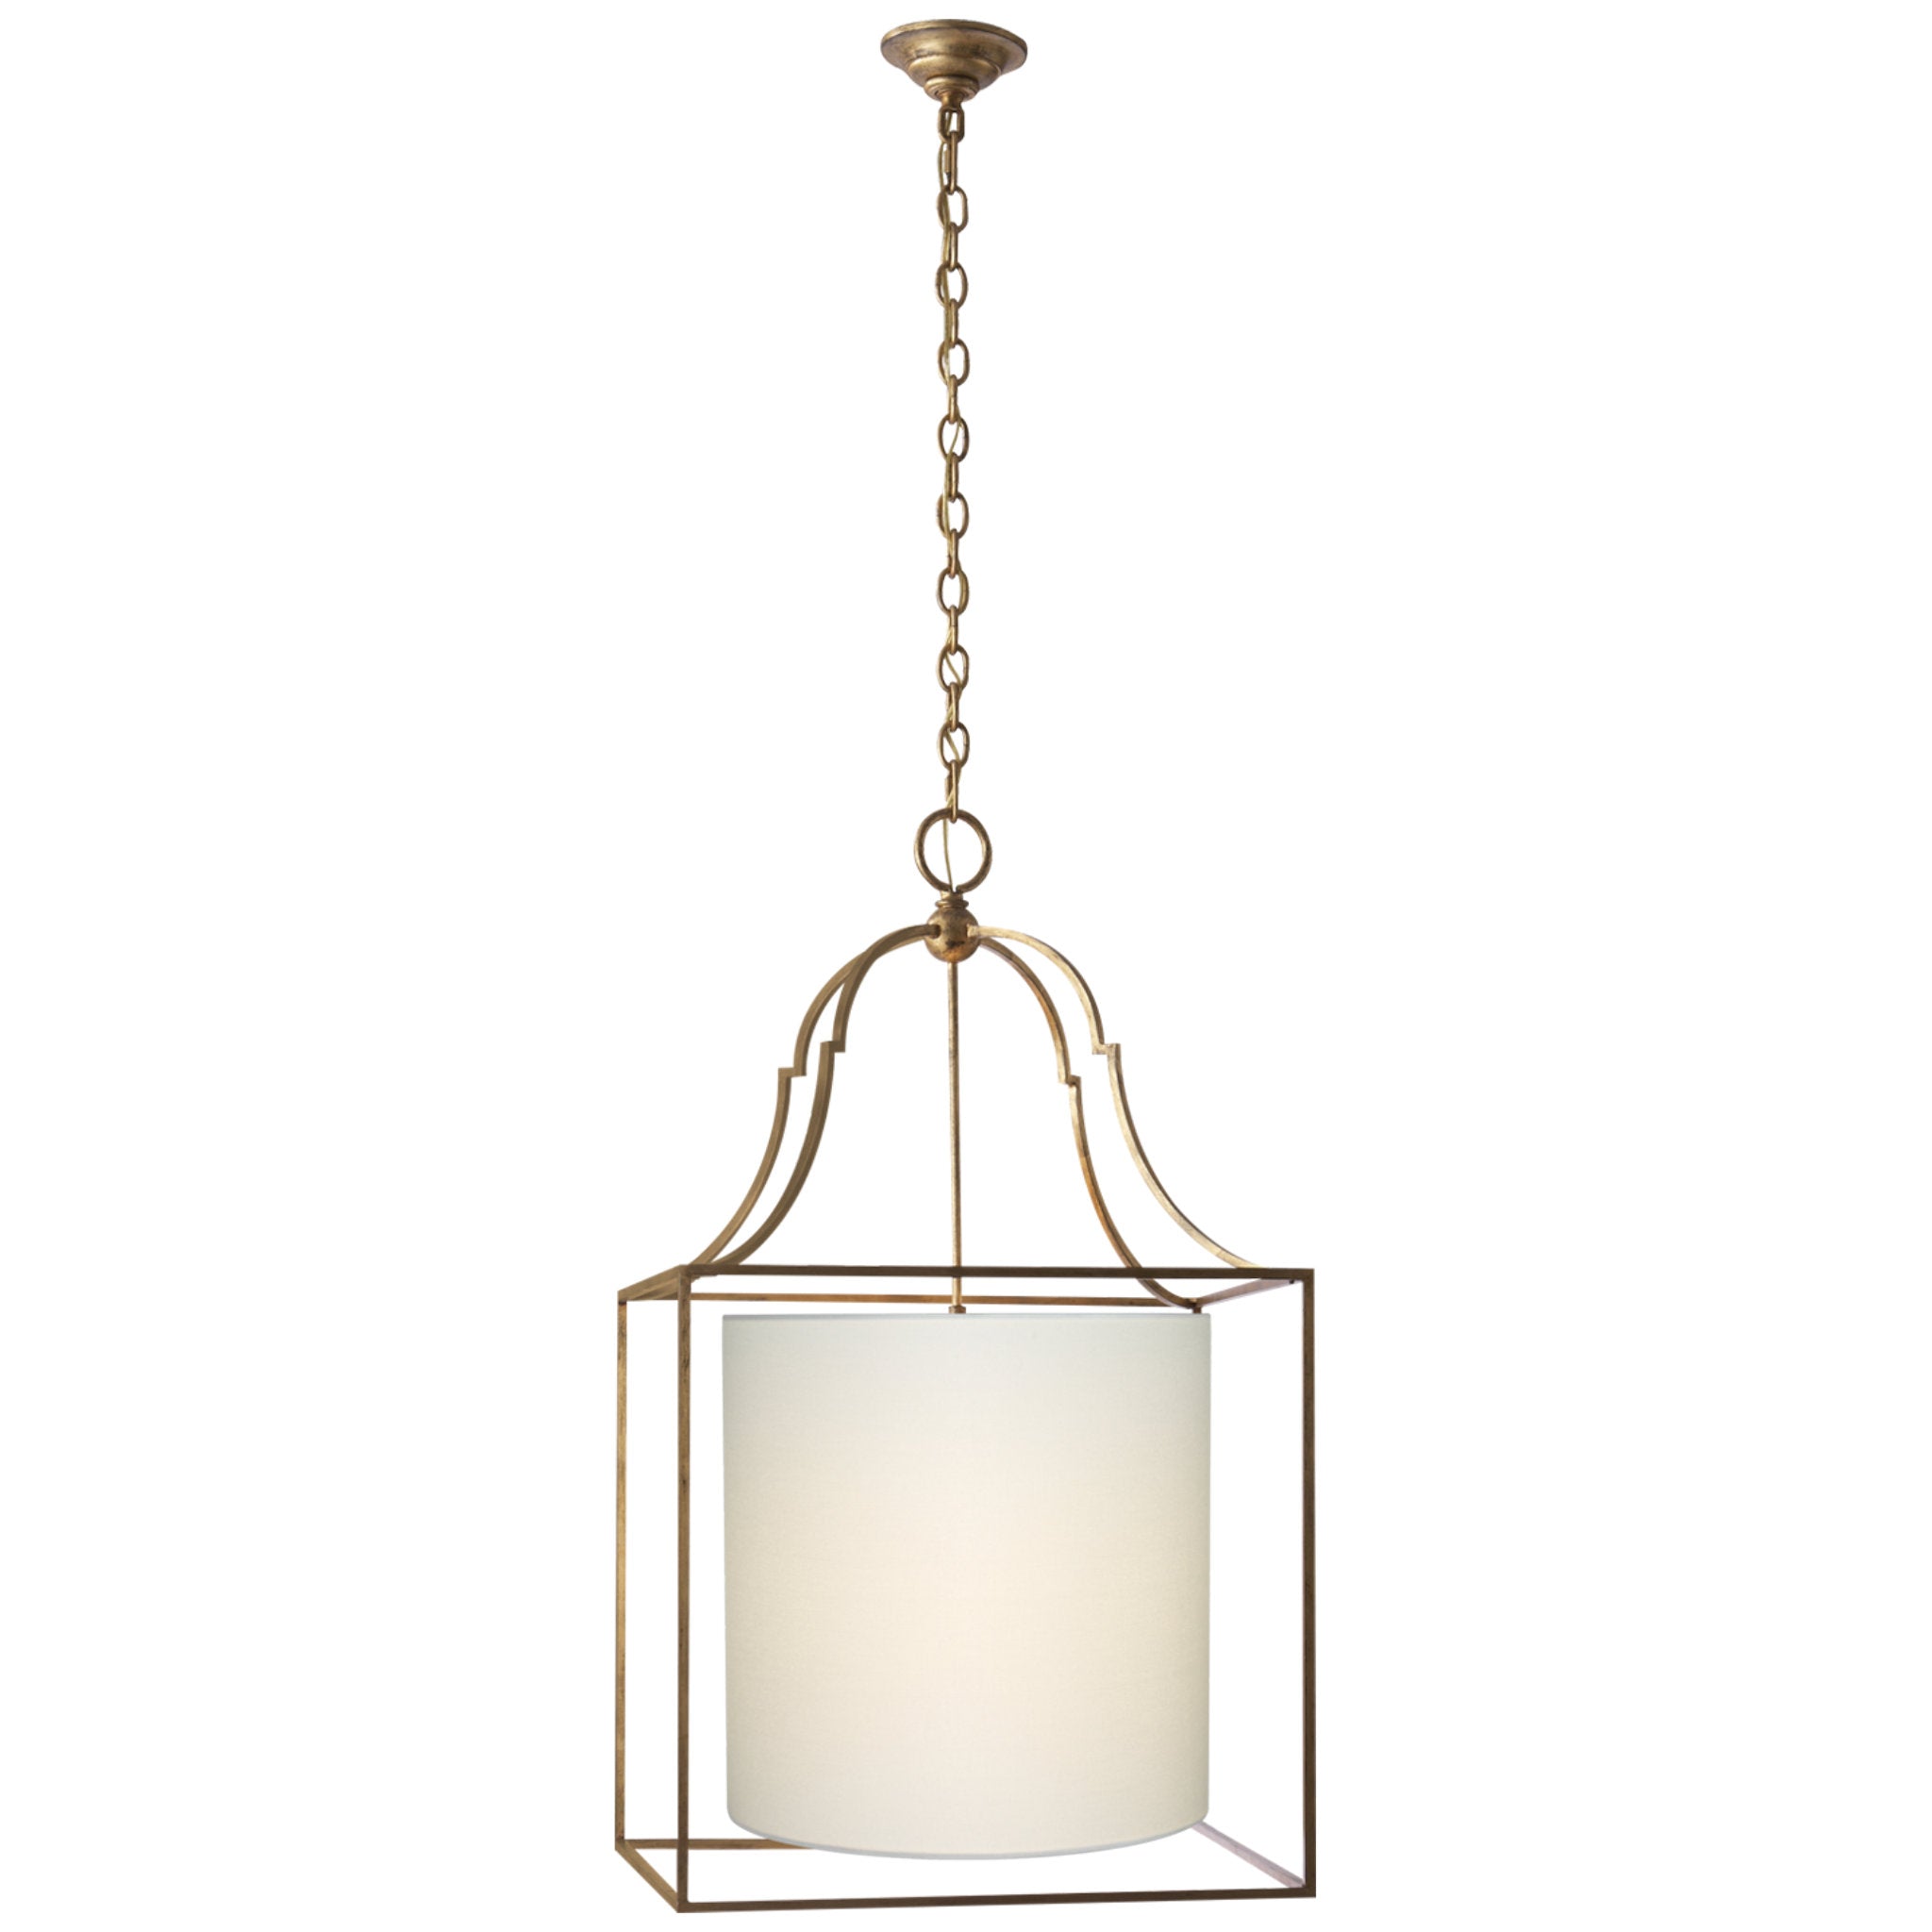 Chapman & Myers Gustavian Lantern in Gilded Iron with Linen Shade